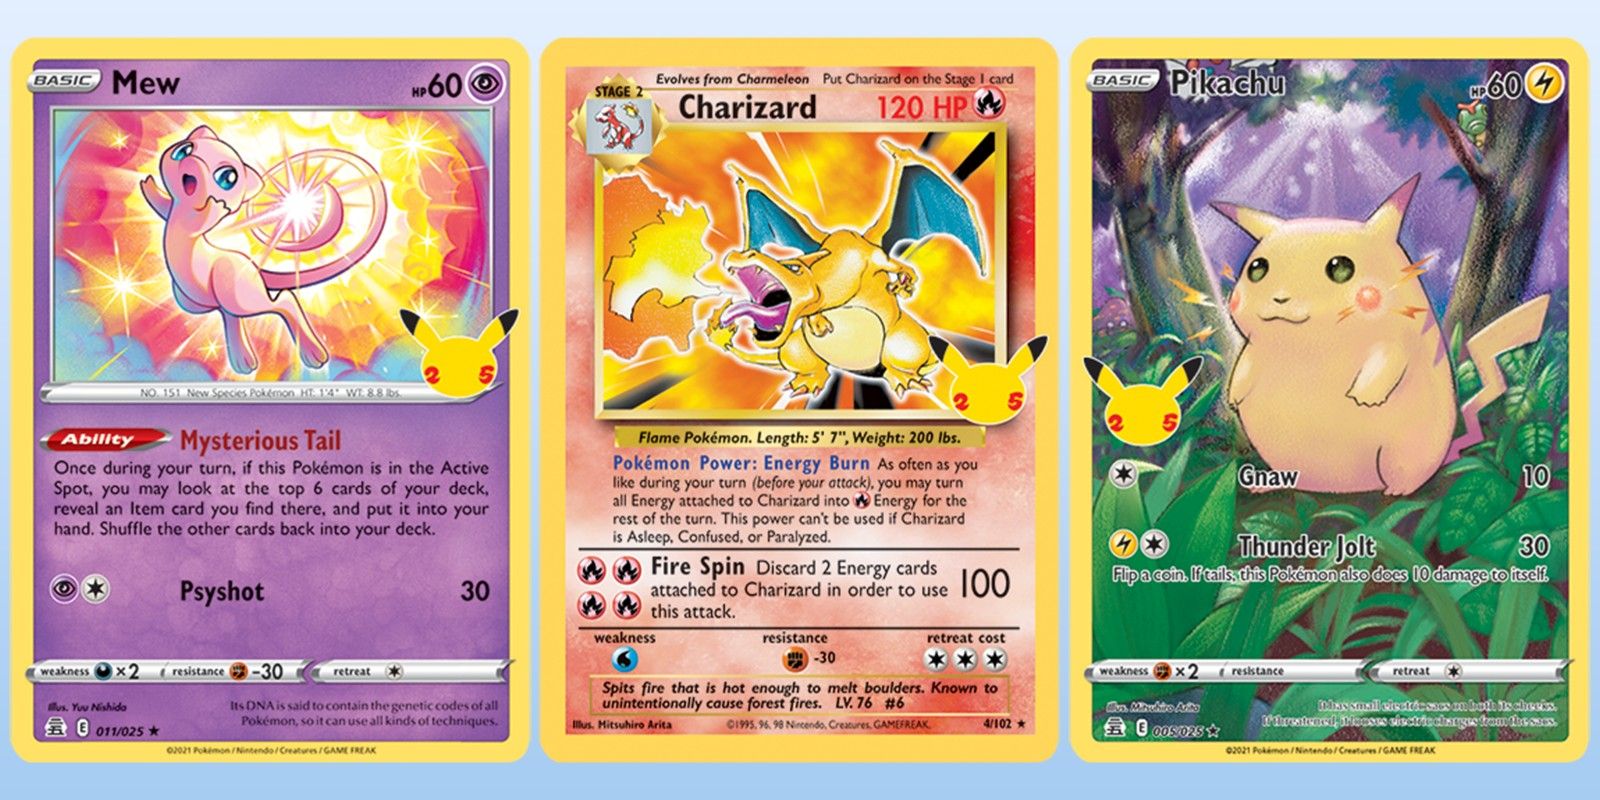 He Spent $57,000 in Covid Relief on a Pokémon Card. Now the U.S.